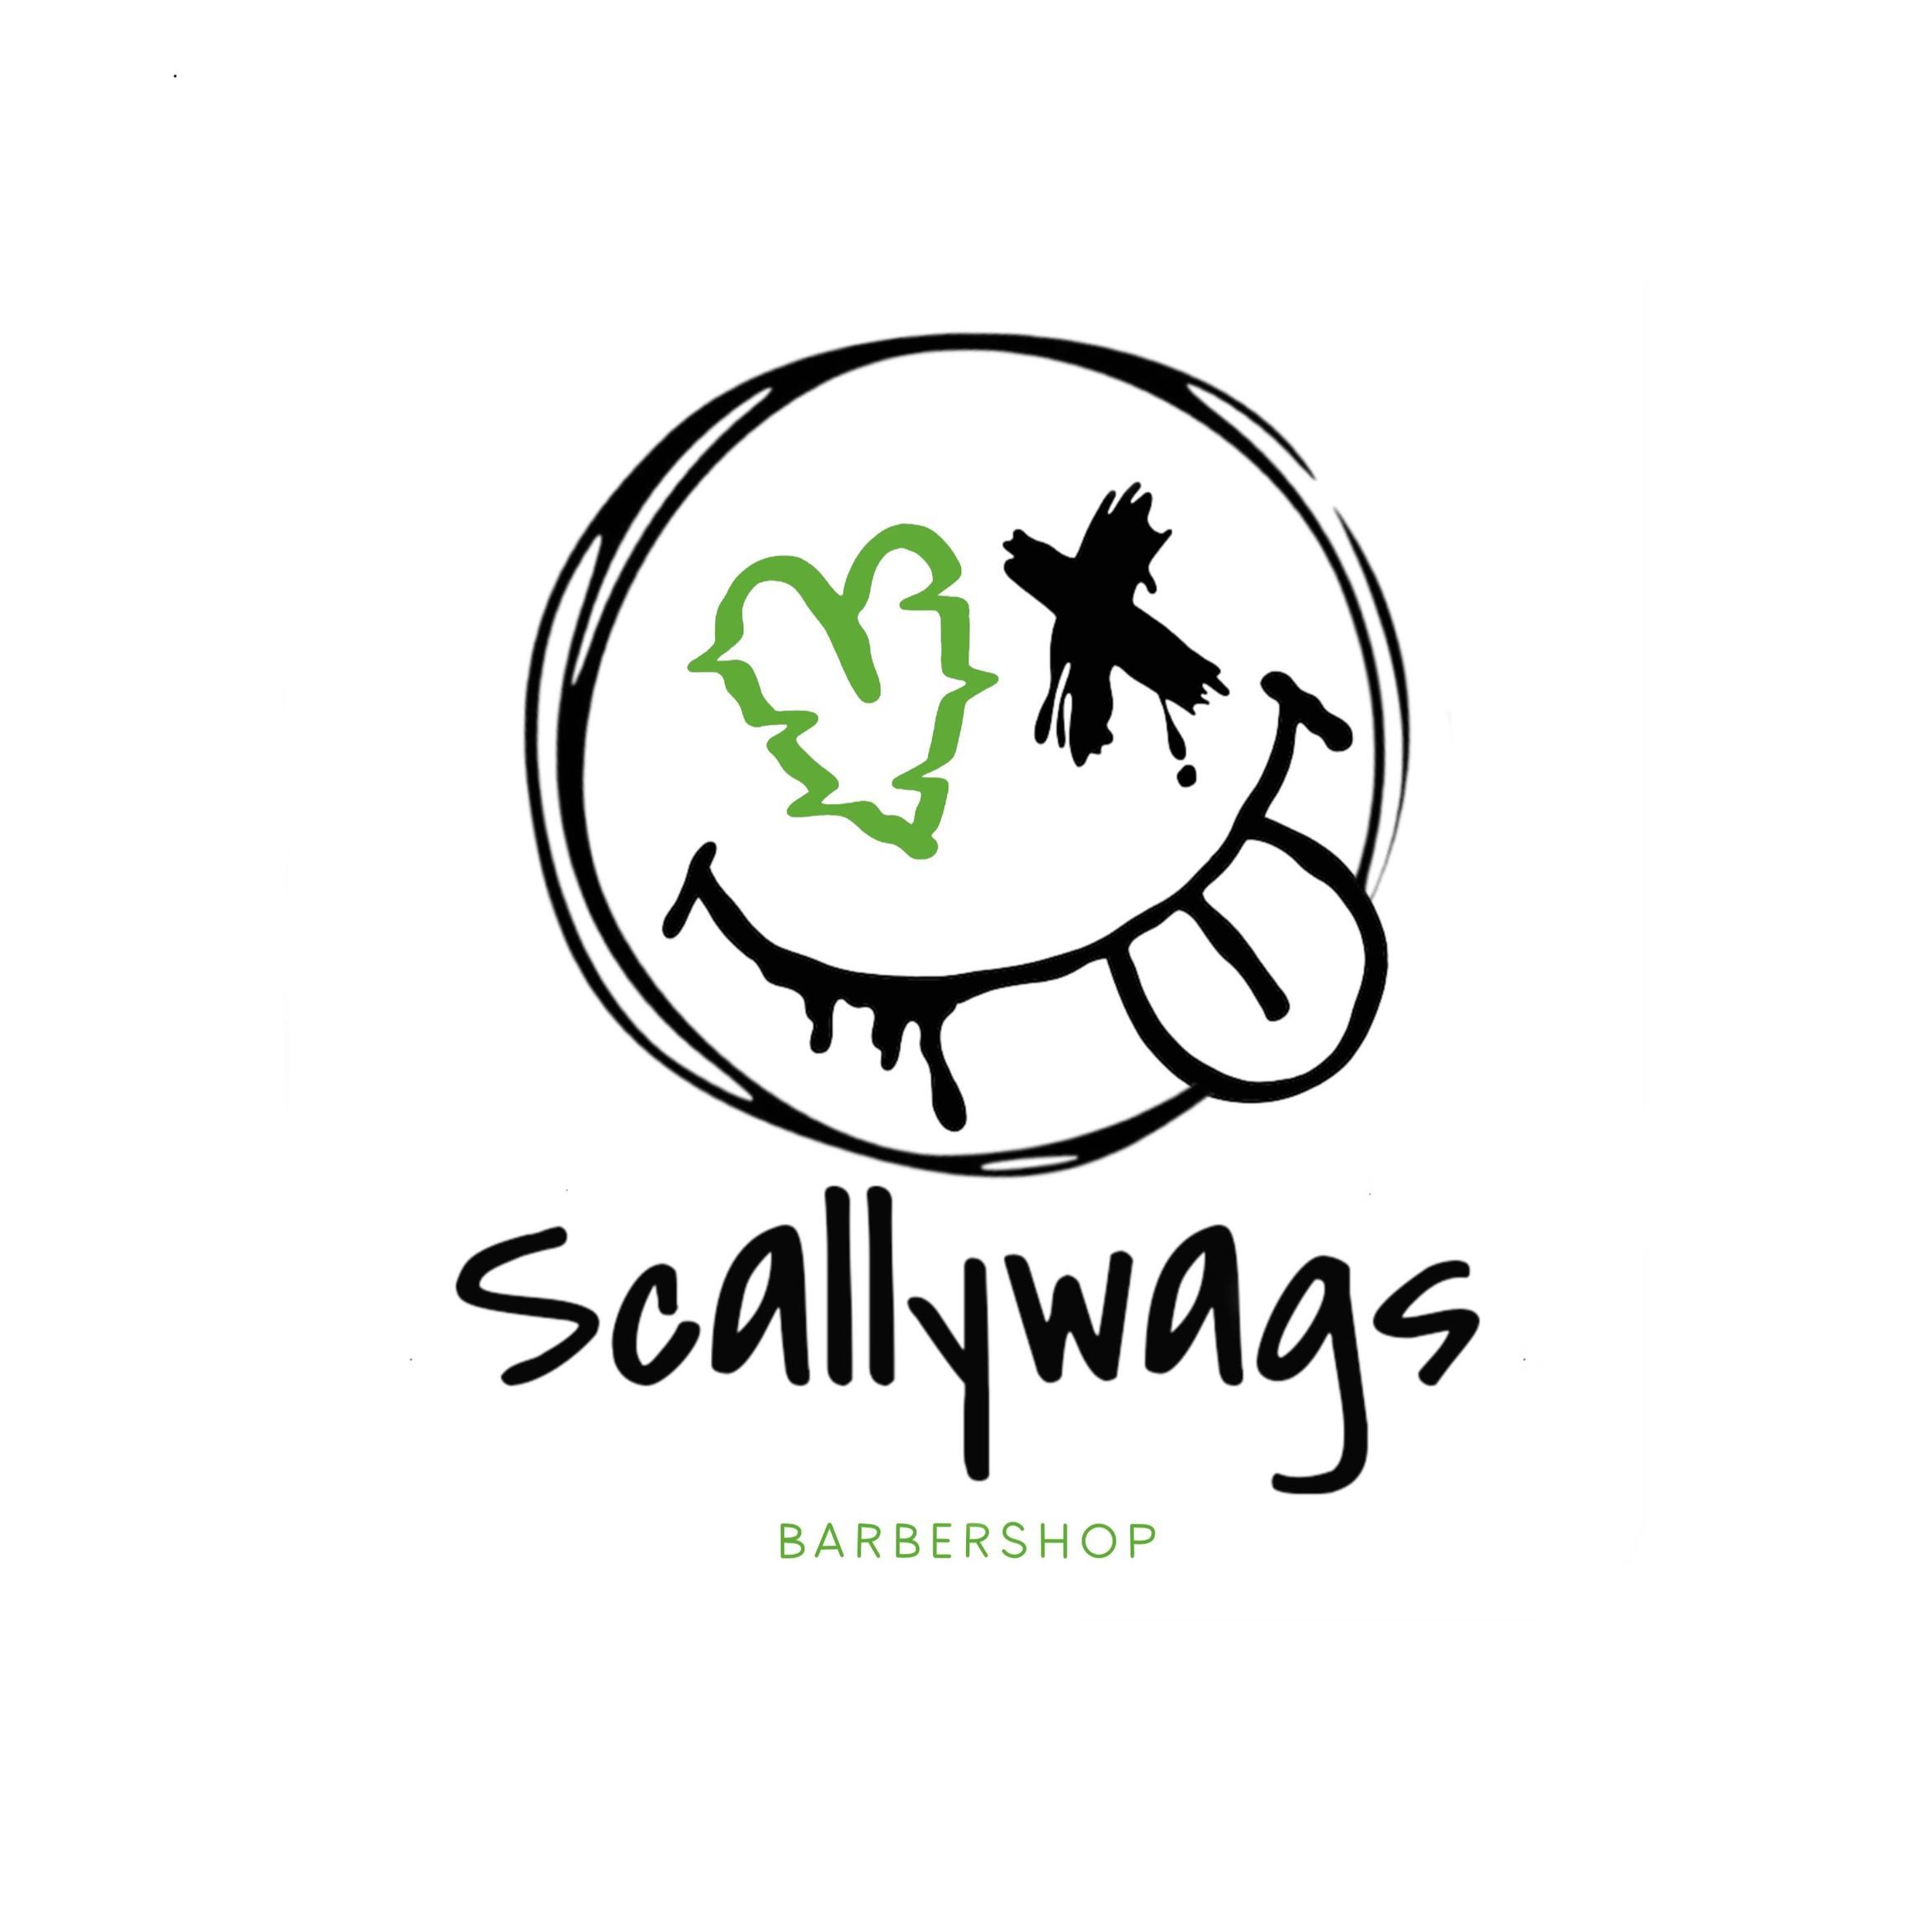 Scallywags Barbershop, 19 Westgate, LS24 9JB, Tadcaster